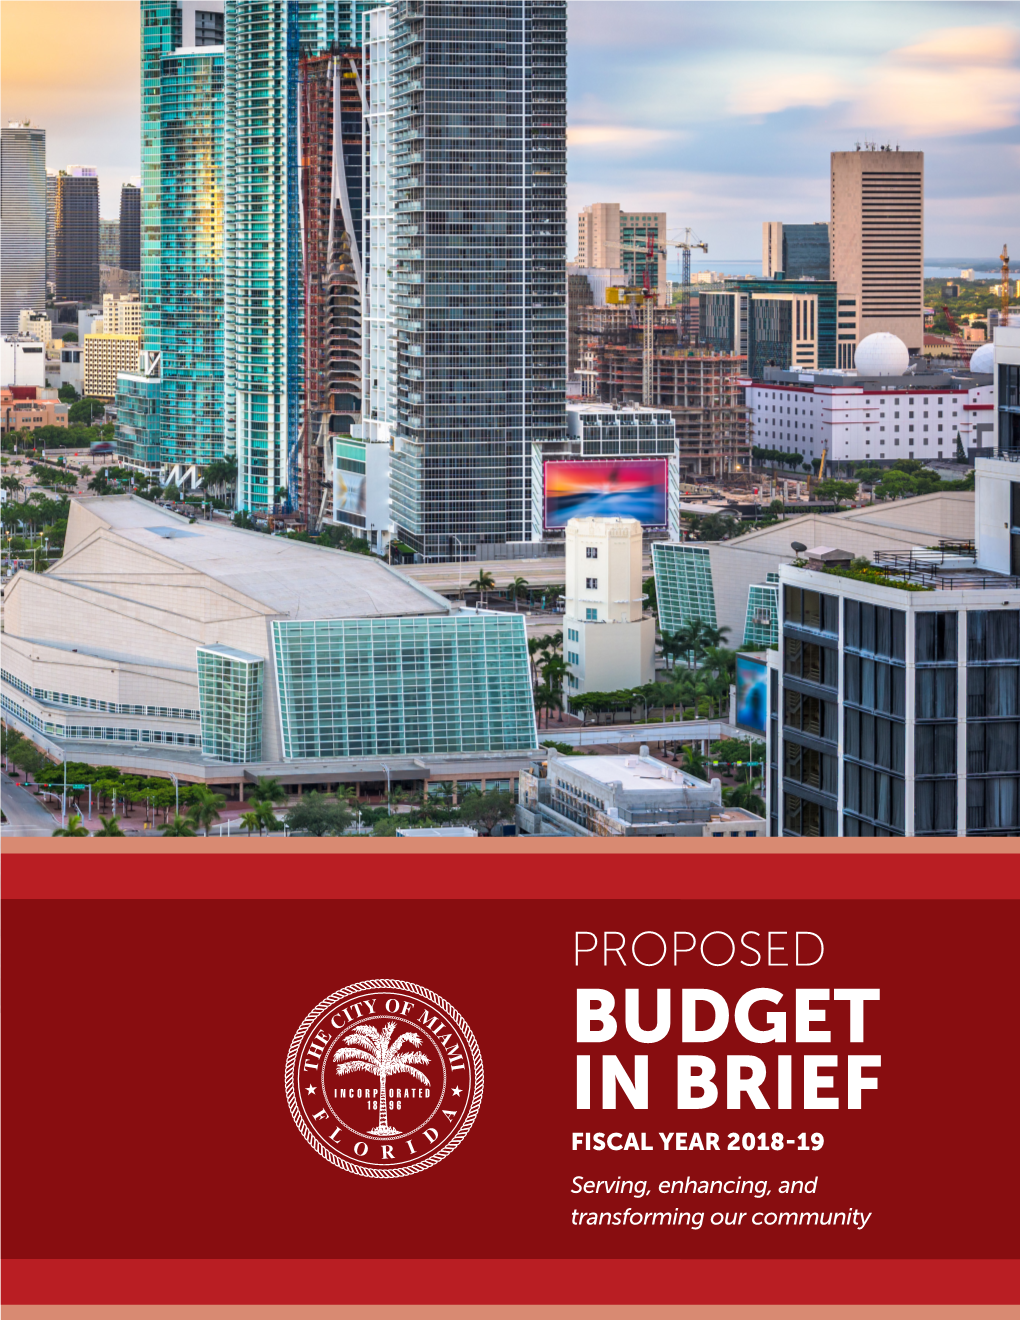 BUDGET in BRIEF FISCAL YEAR 2018-19 Serving, Enhancing, and Transforming Our Community